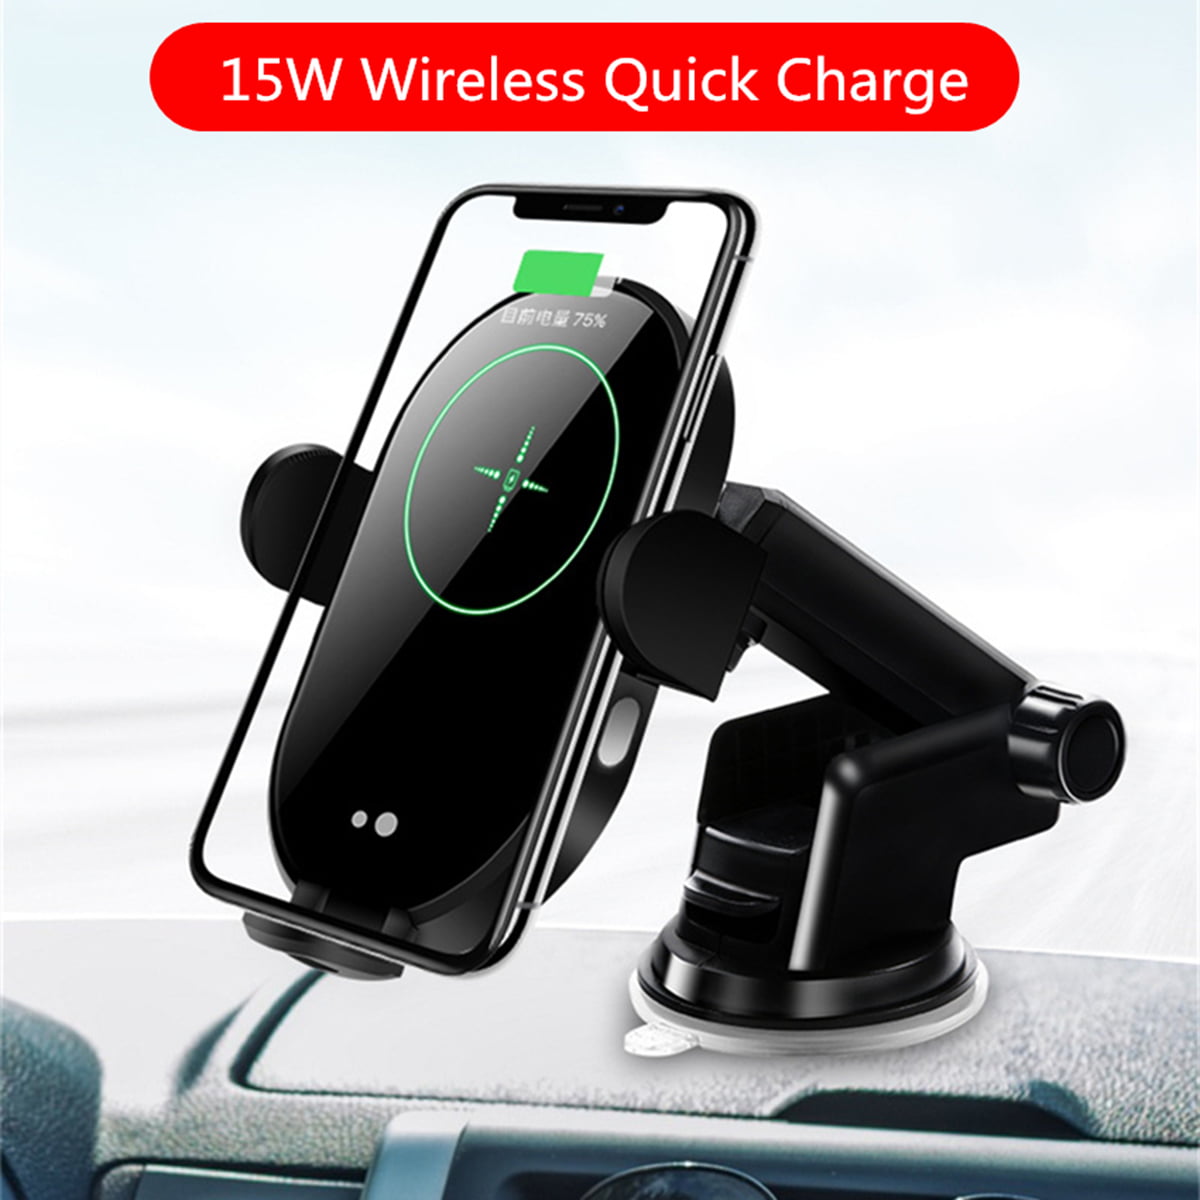 Wireless Car Charger Mount Qi 15W Max Auto-Clamping Car Charging Holder Car Phone Holder Dash Air Vent Compatible with iPhone12/Mini/11/Pro/Max/XR/Xs/X/8/+SamsungS10/S10+/S9/S9+/Note 